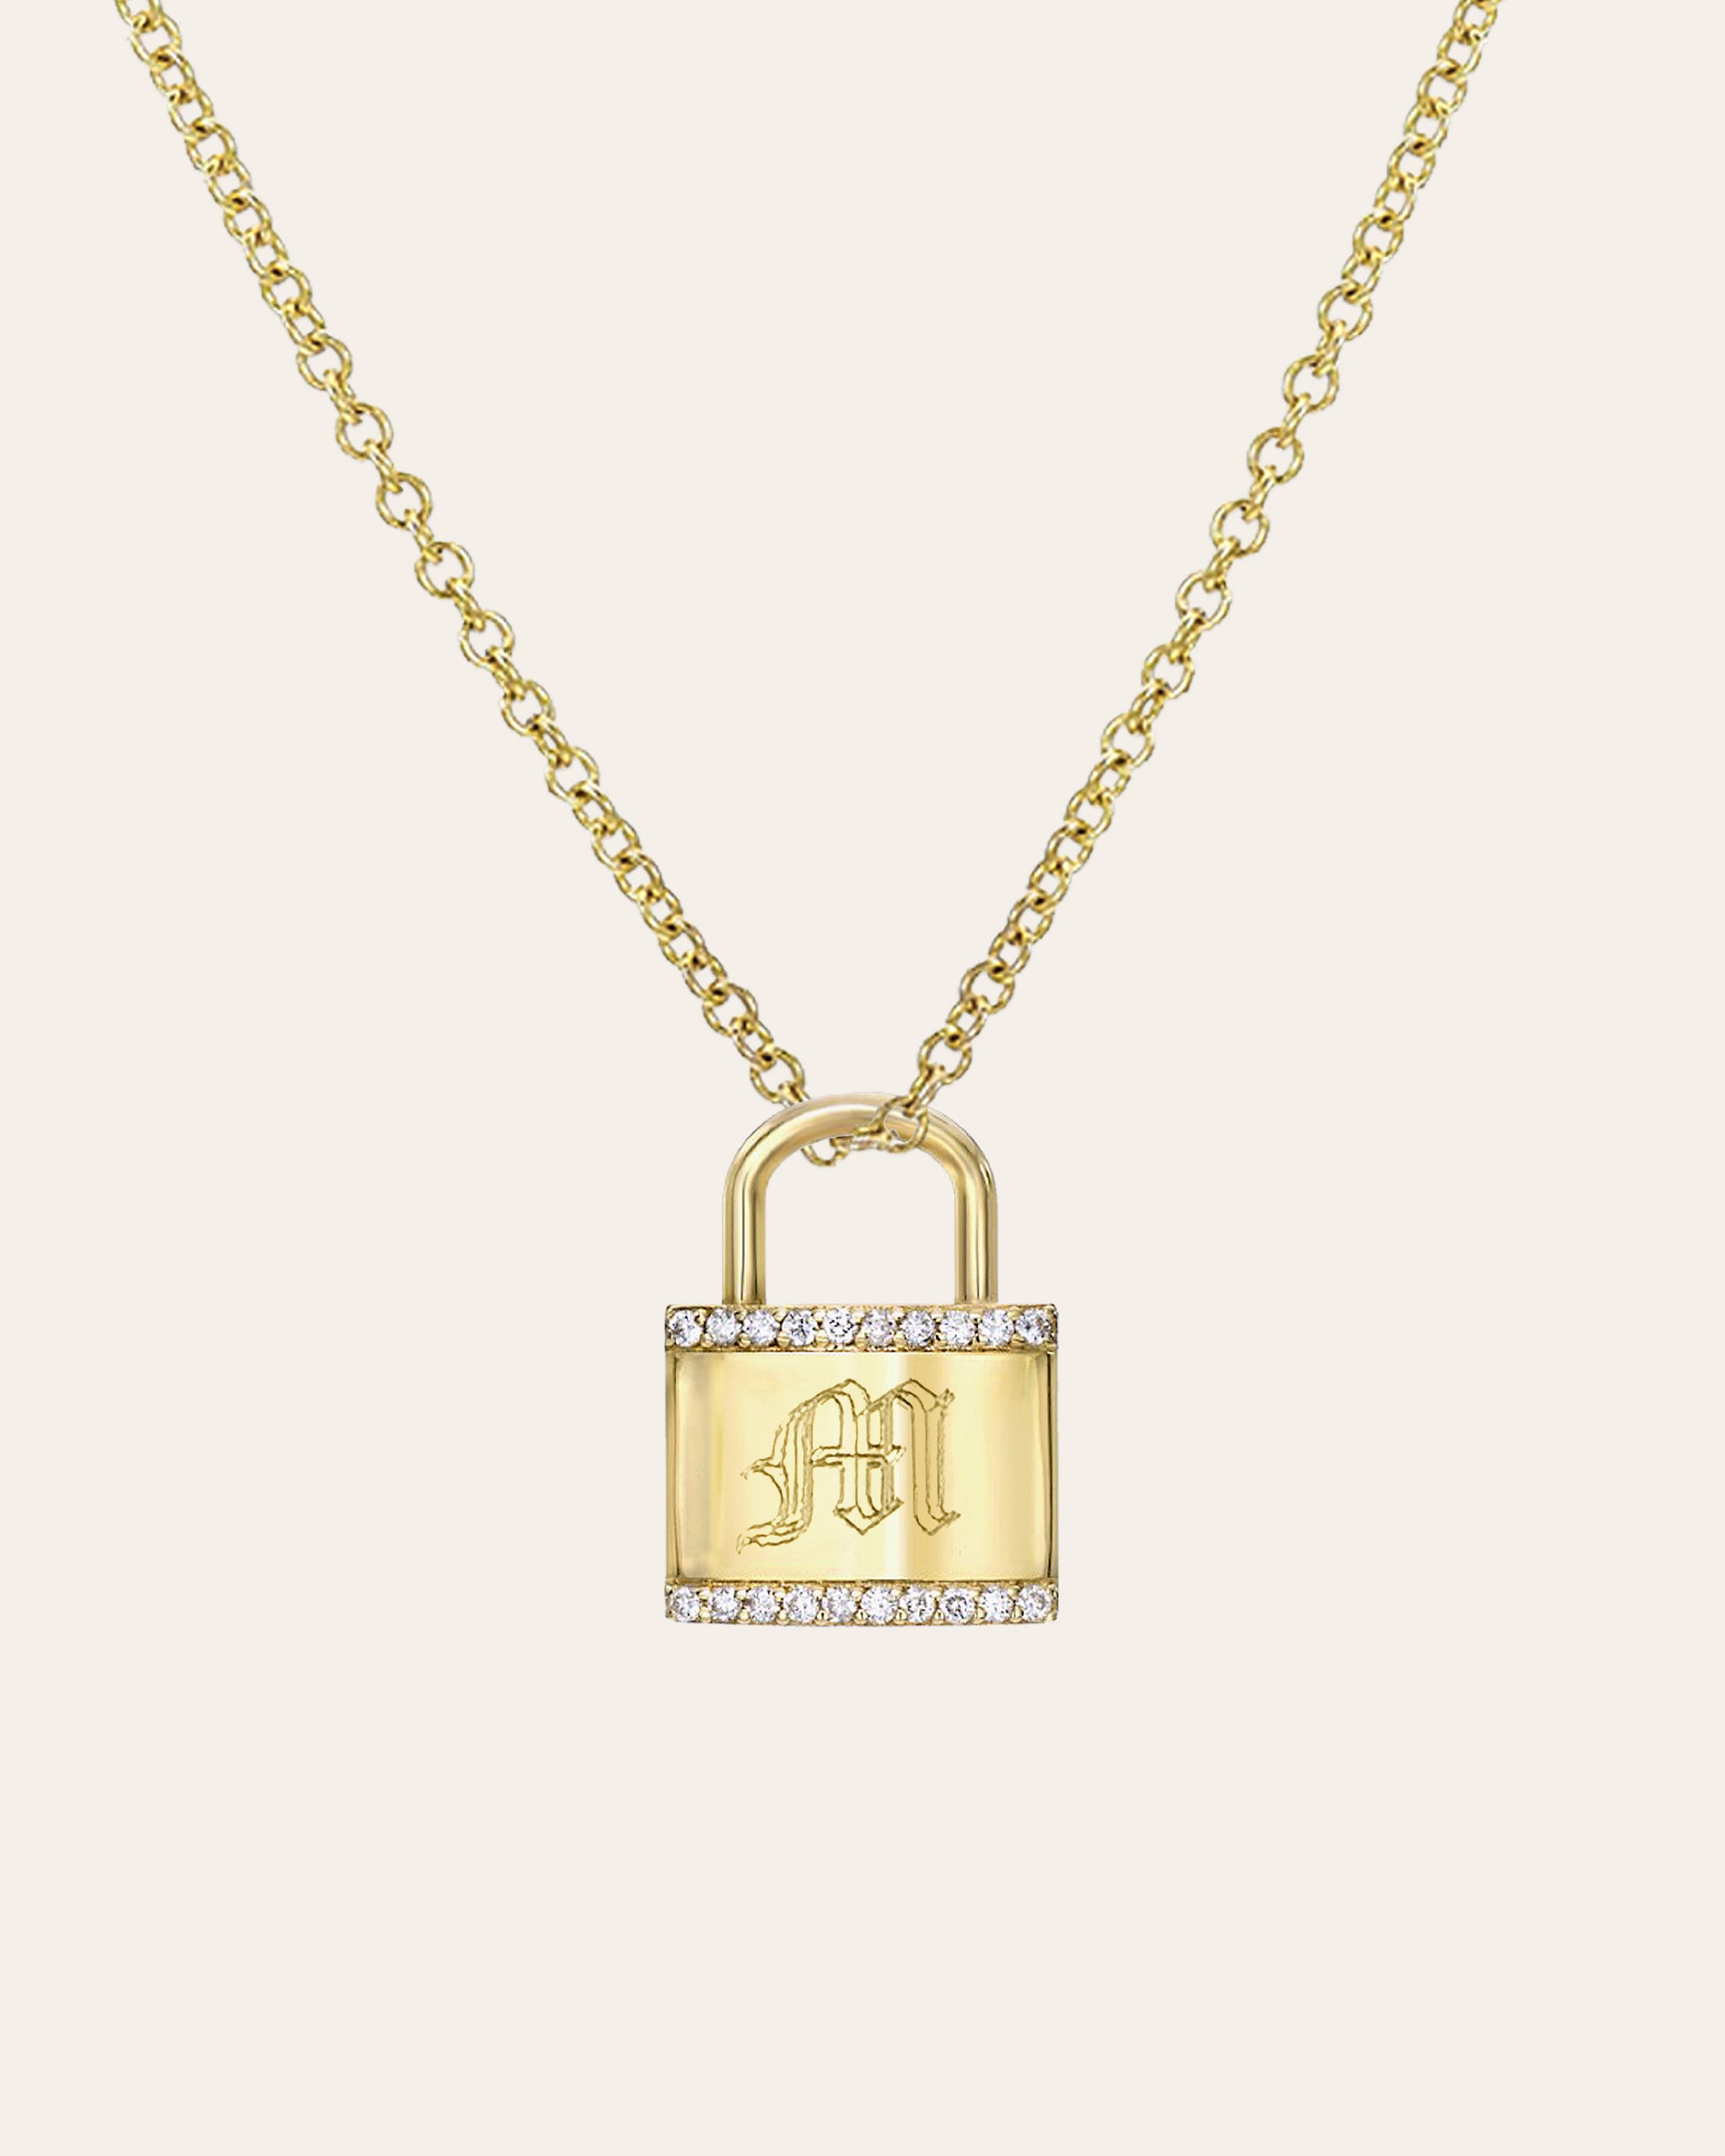 14K Solid Gold Initial Lock Necklace with Diamonds